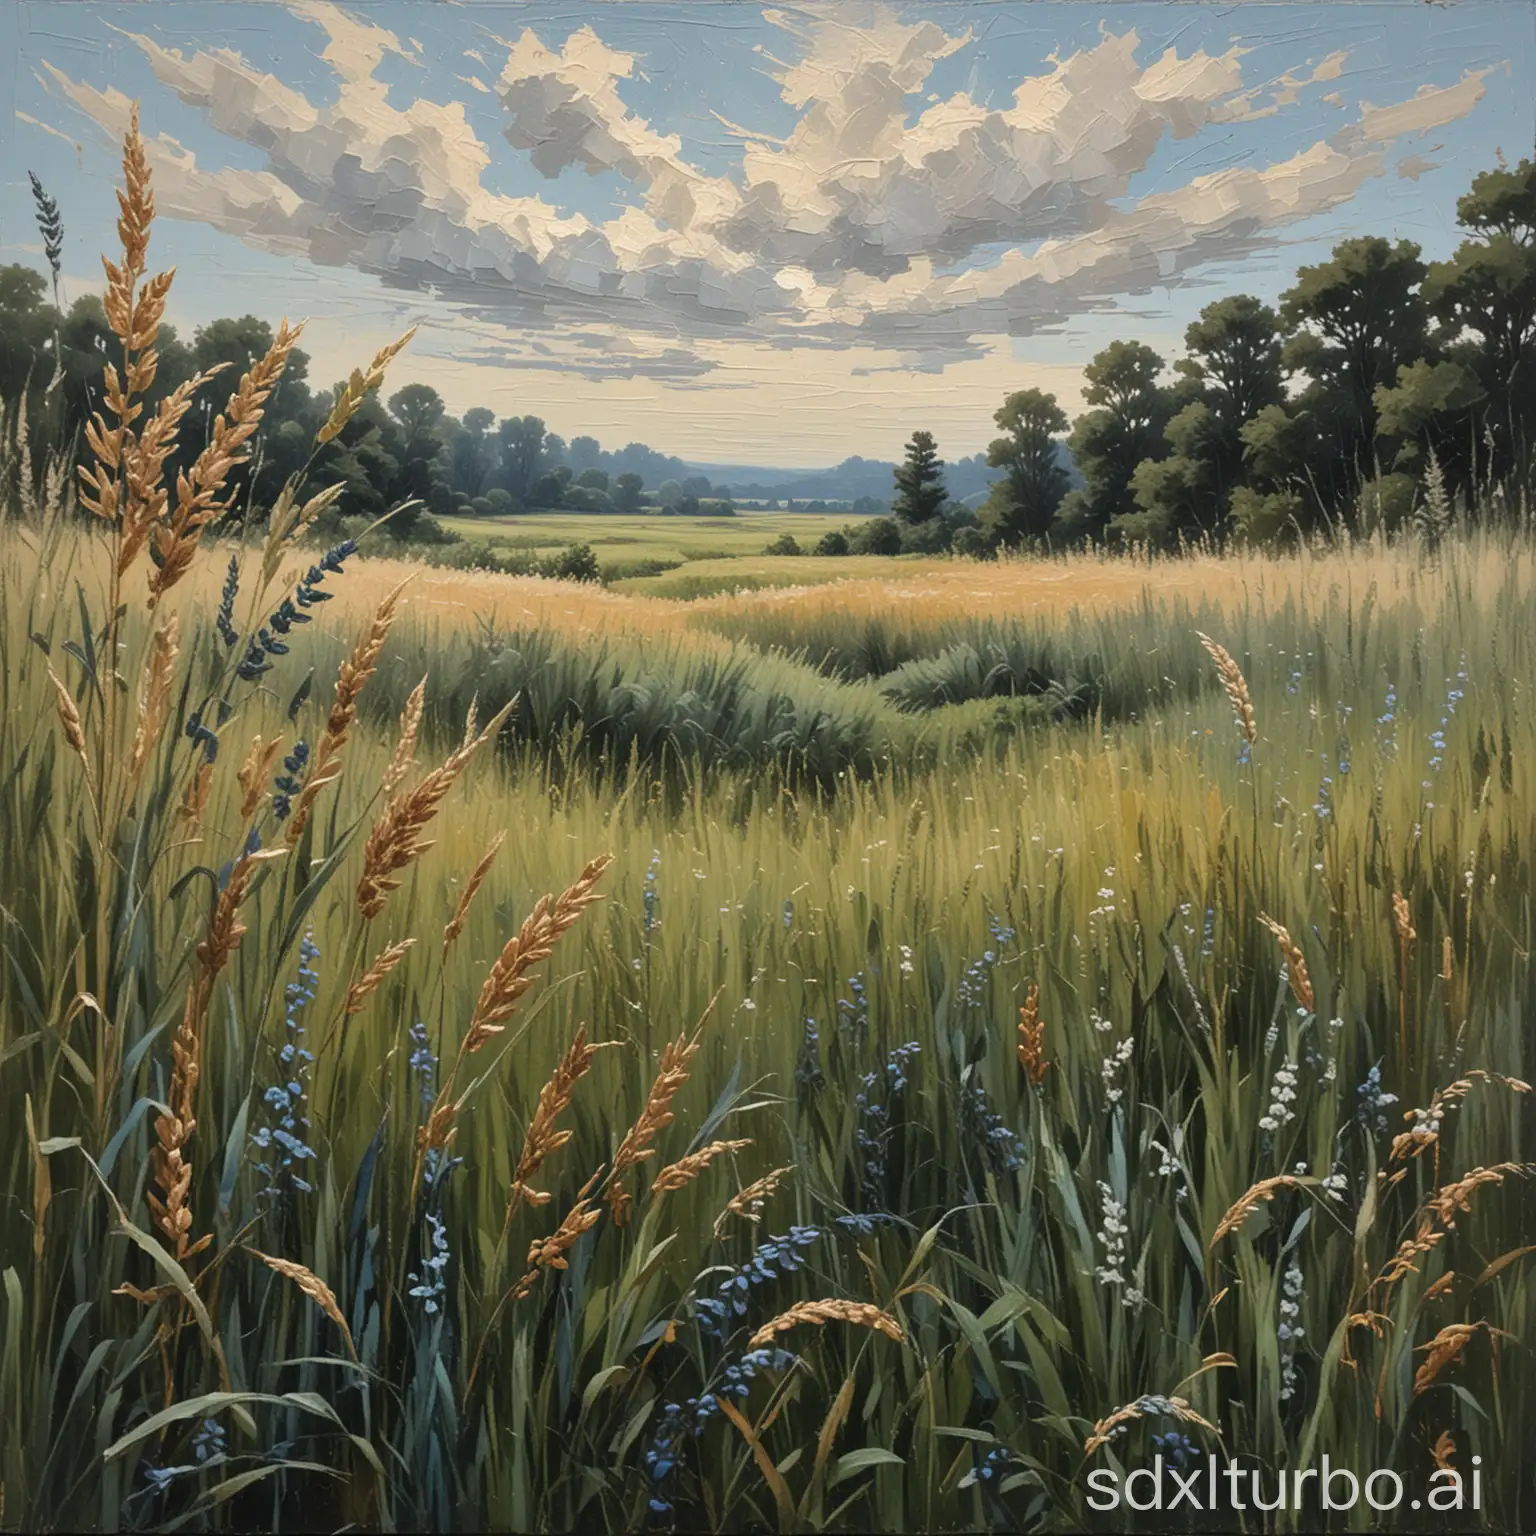 brushstrokes impasto, an oil painting, in a field of tall grasses and wheat, with grasslands in background, in the style of light indigo, dark green and dark beige, pointillist florals, barbizon school, grey and bronze, cottagepunk, rusticcore, vintage